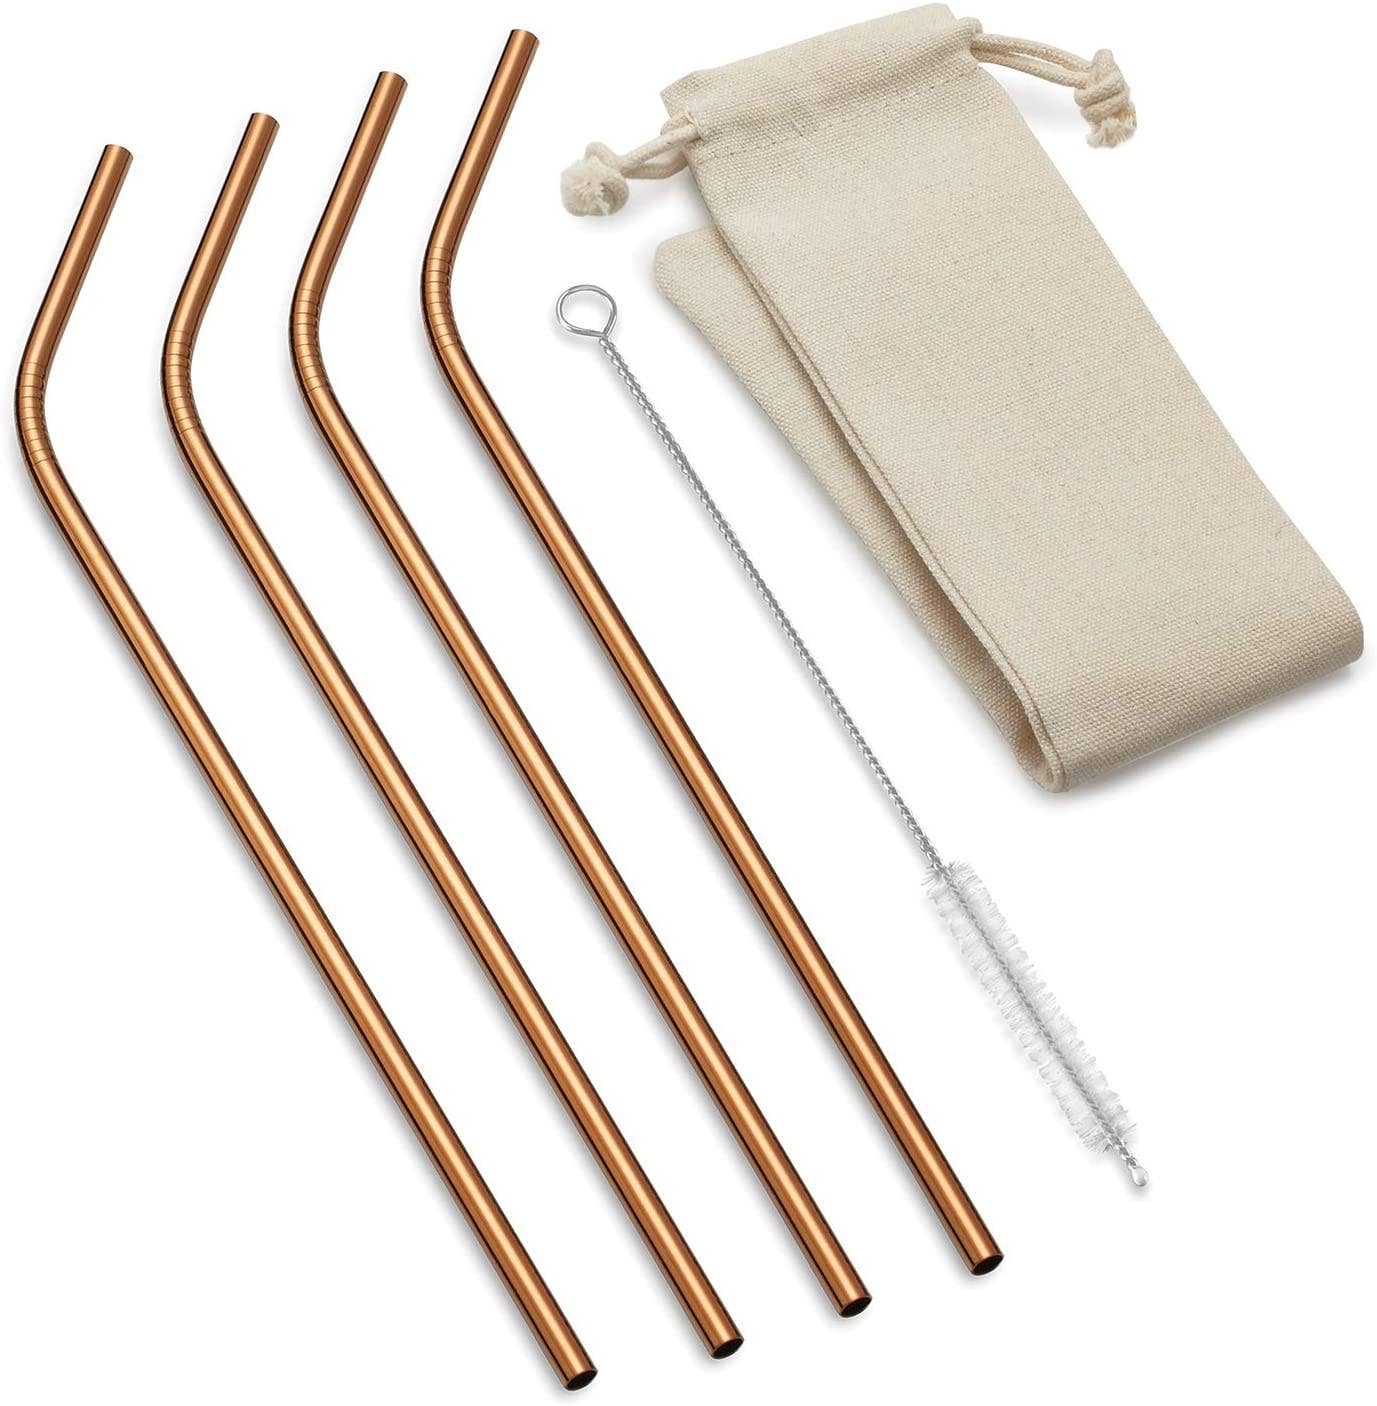 Outset Copper Long Bent Straw w/ Bag